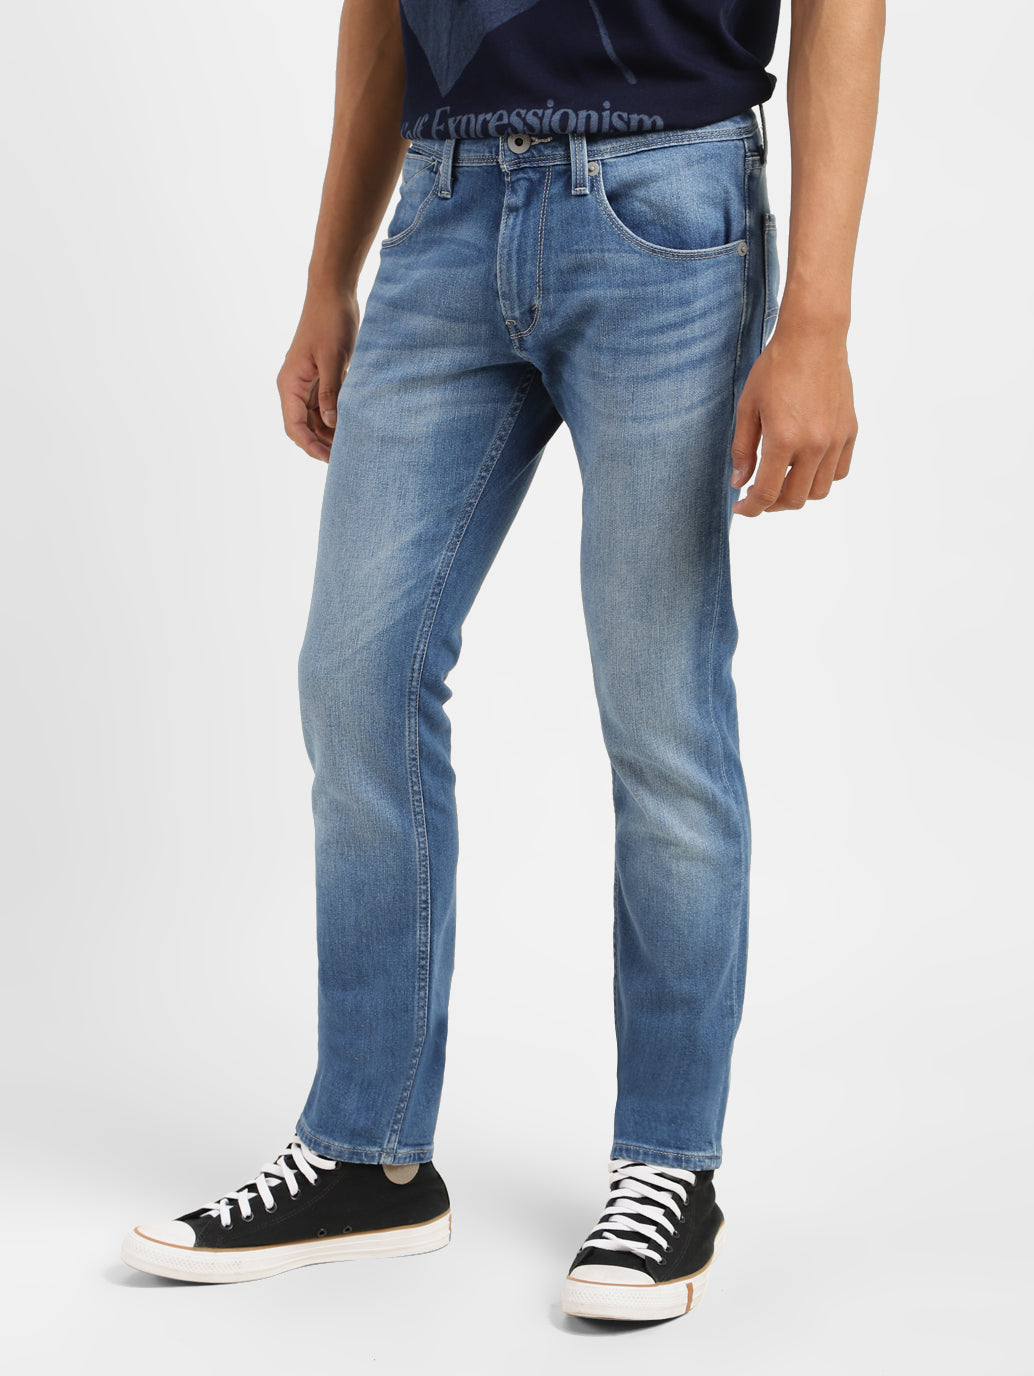 Men's 65504 Skinny Fit Jeans – Levis India Store